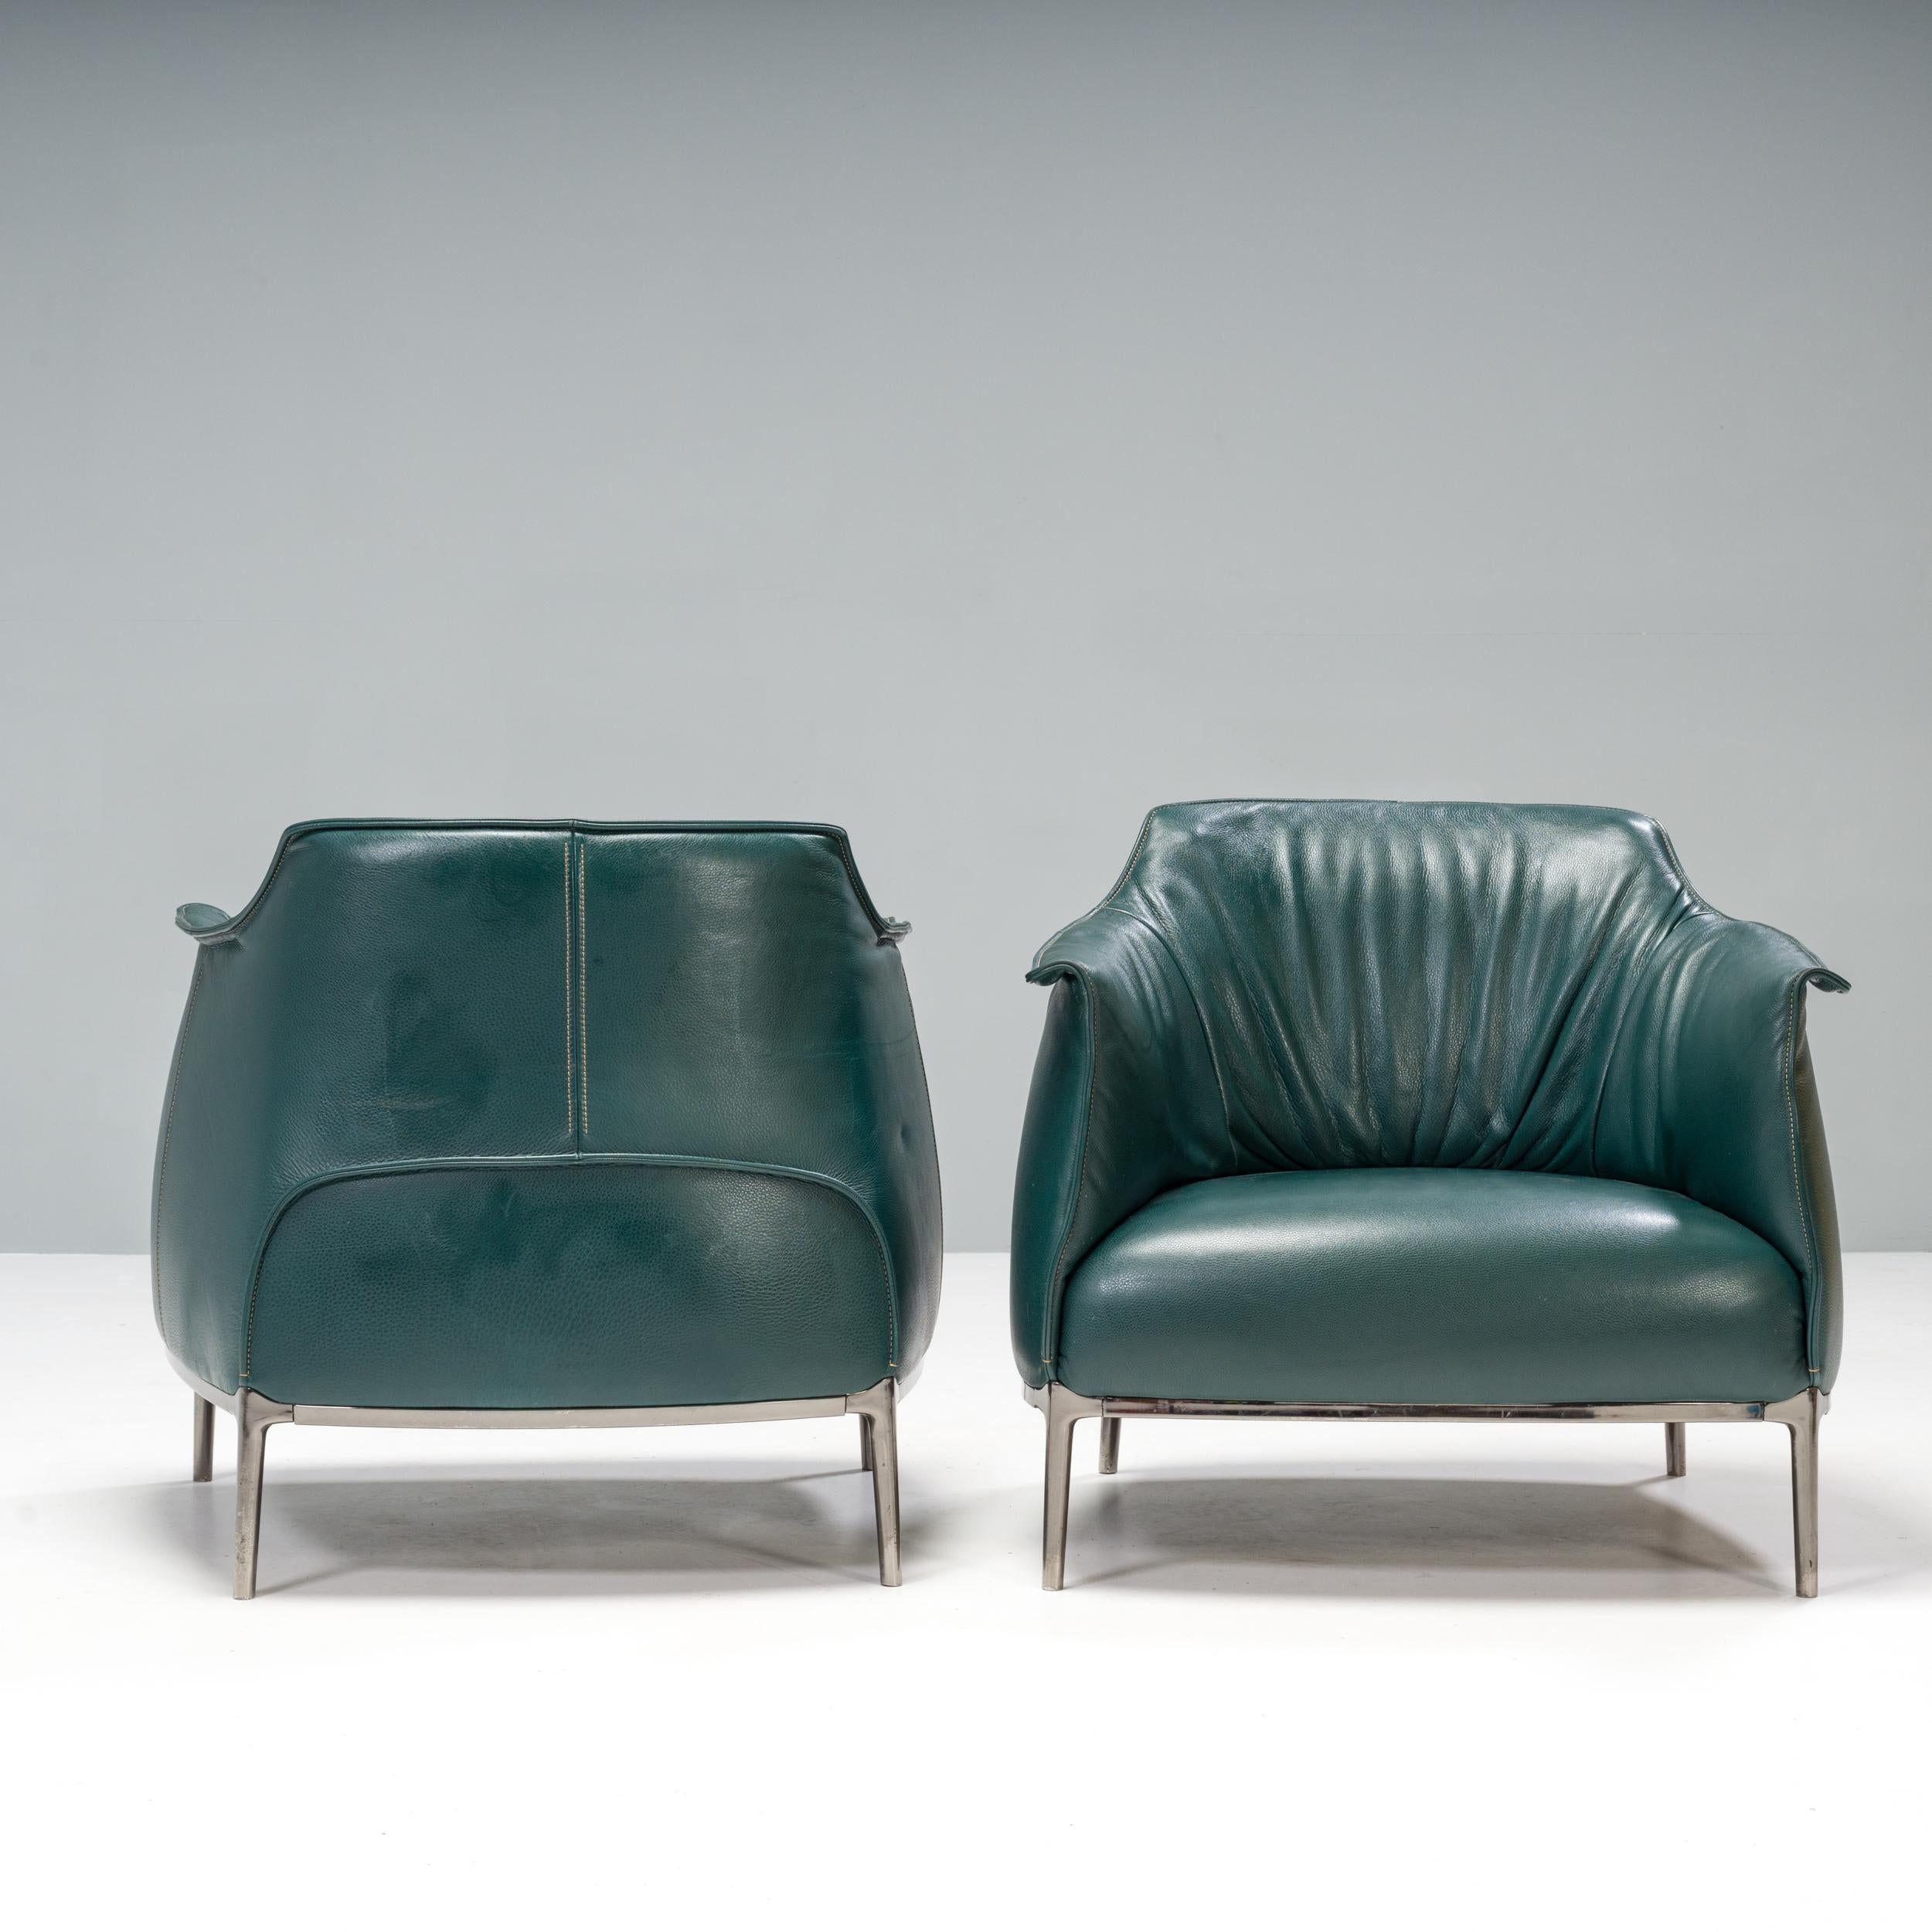 Designed by French designer and architect Jean-Marie Massaud and manufactured by Poltrona Frau, the Archibald armchair is the perfect balance of comfort and style.

Constructed from a tubular steel frame, the armchair has slimline cast-aluminium